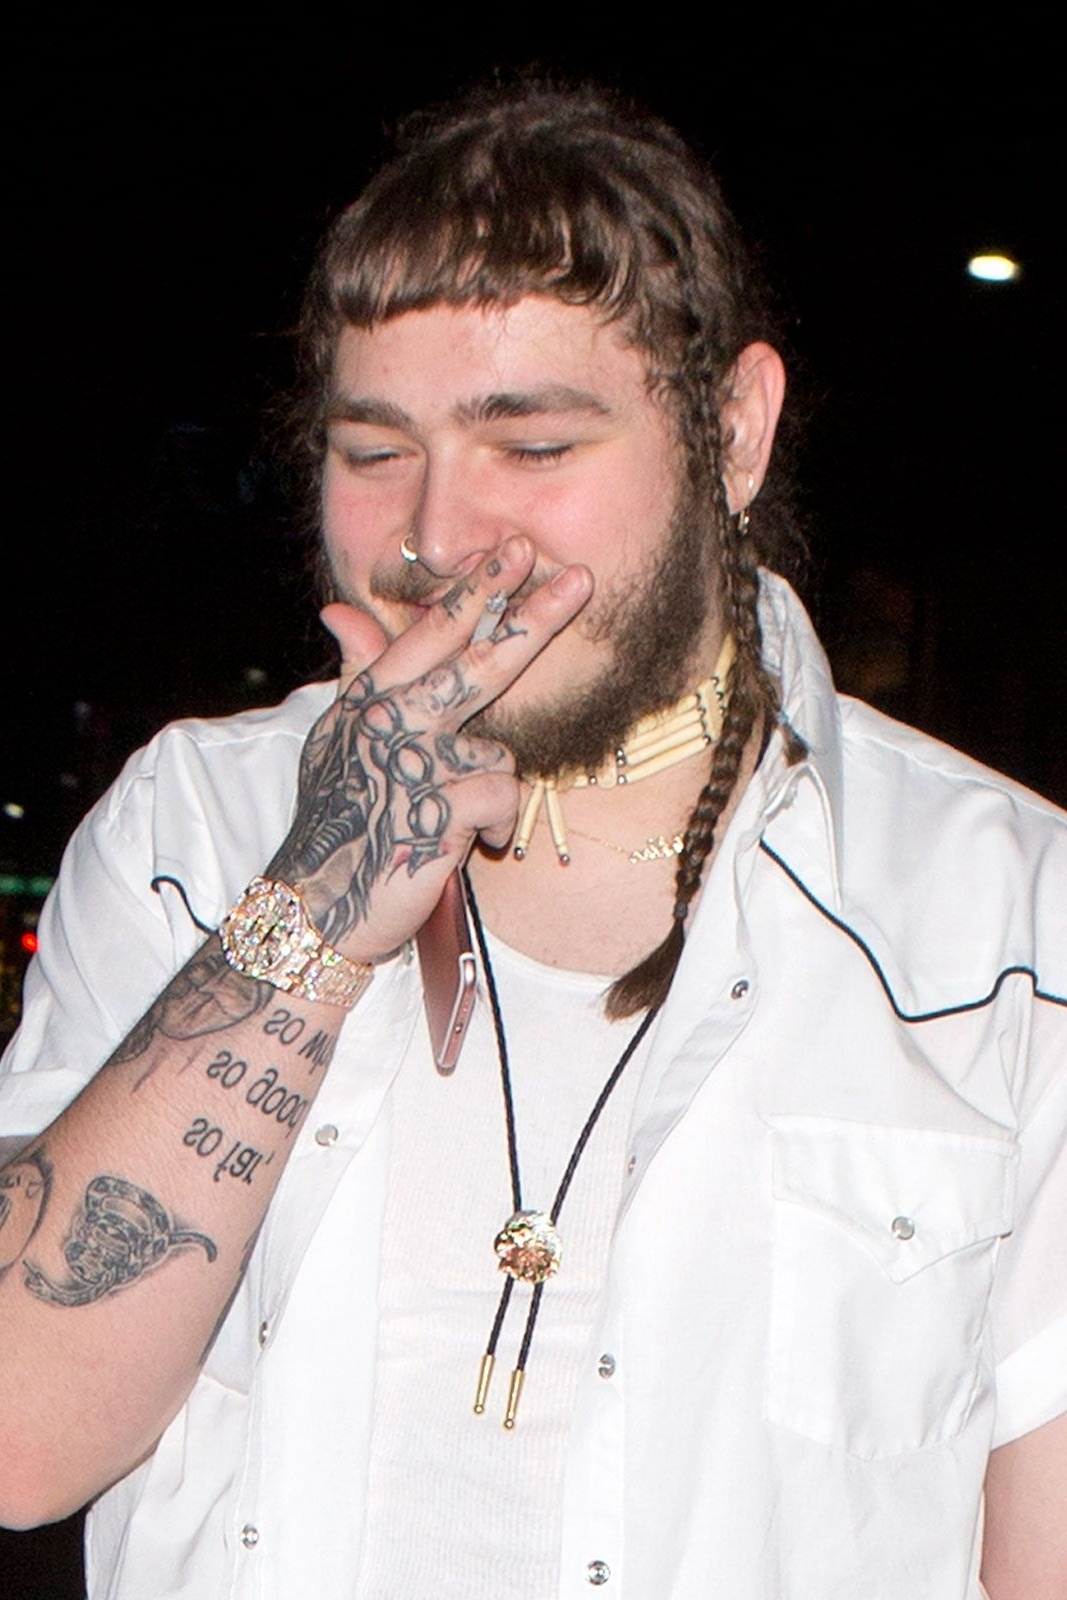 Post Malone Wallpapers High Quality | Download Free